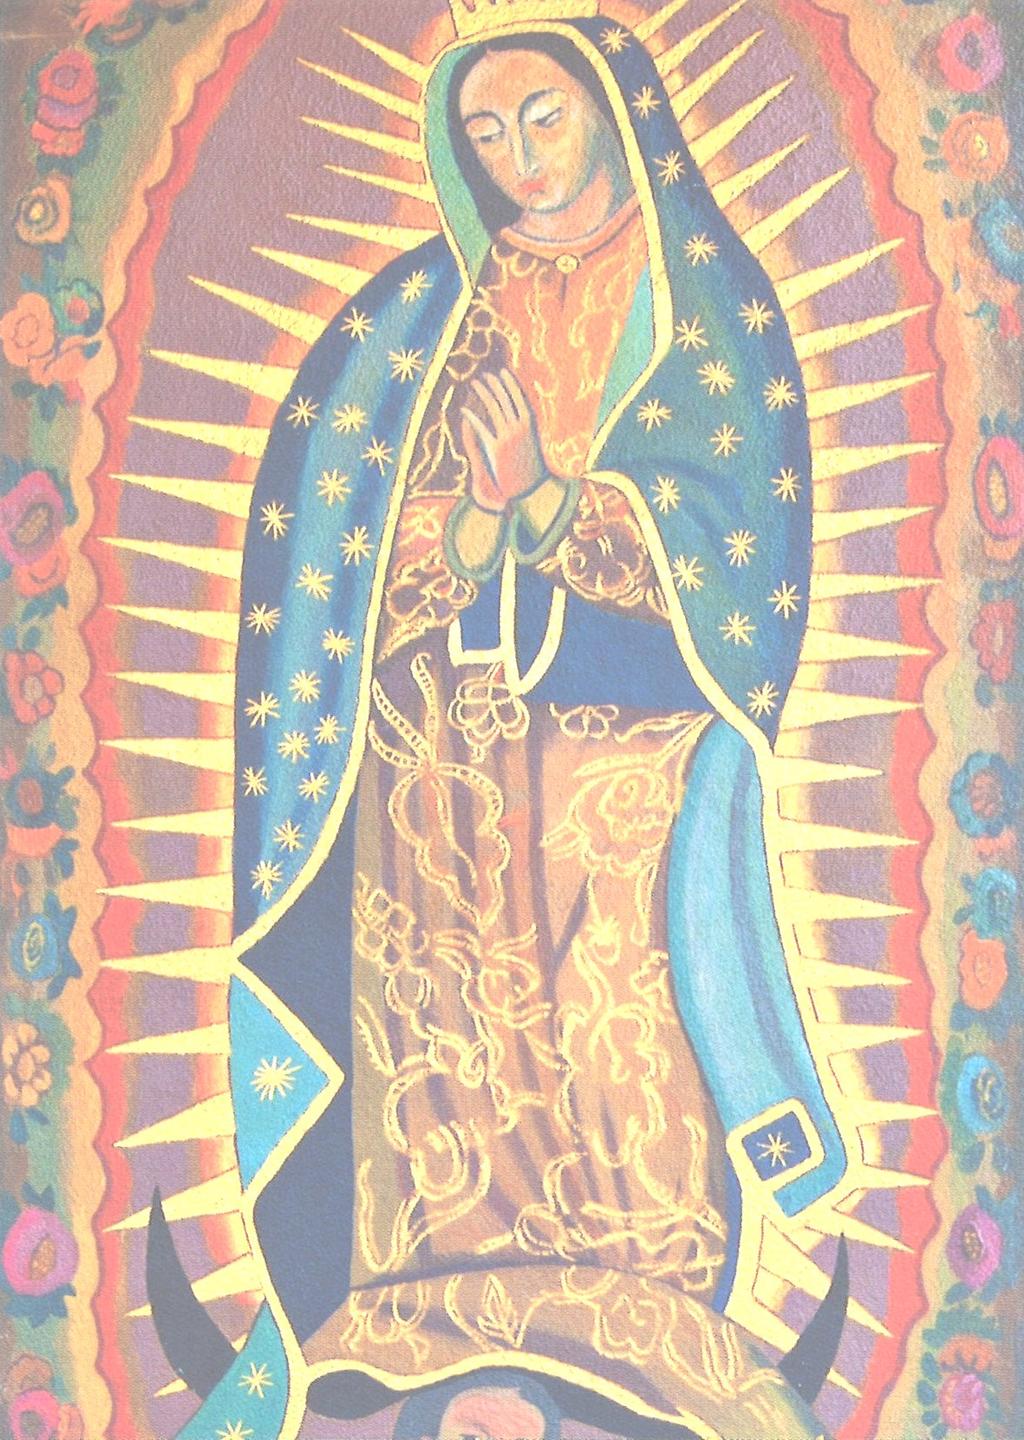 Juan Diego, whom you called the littlest and dearest of your sons.